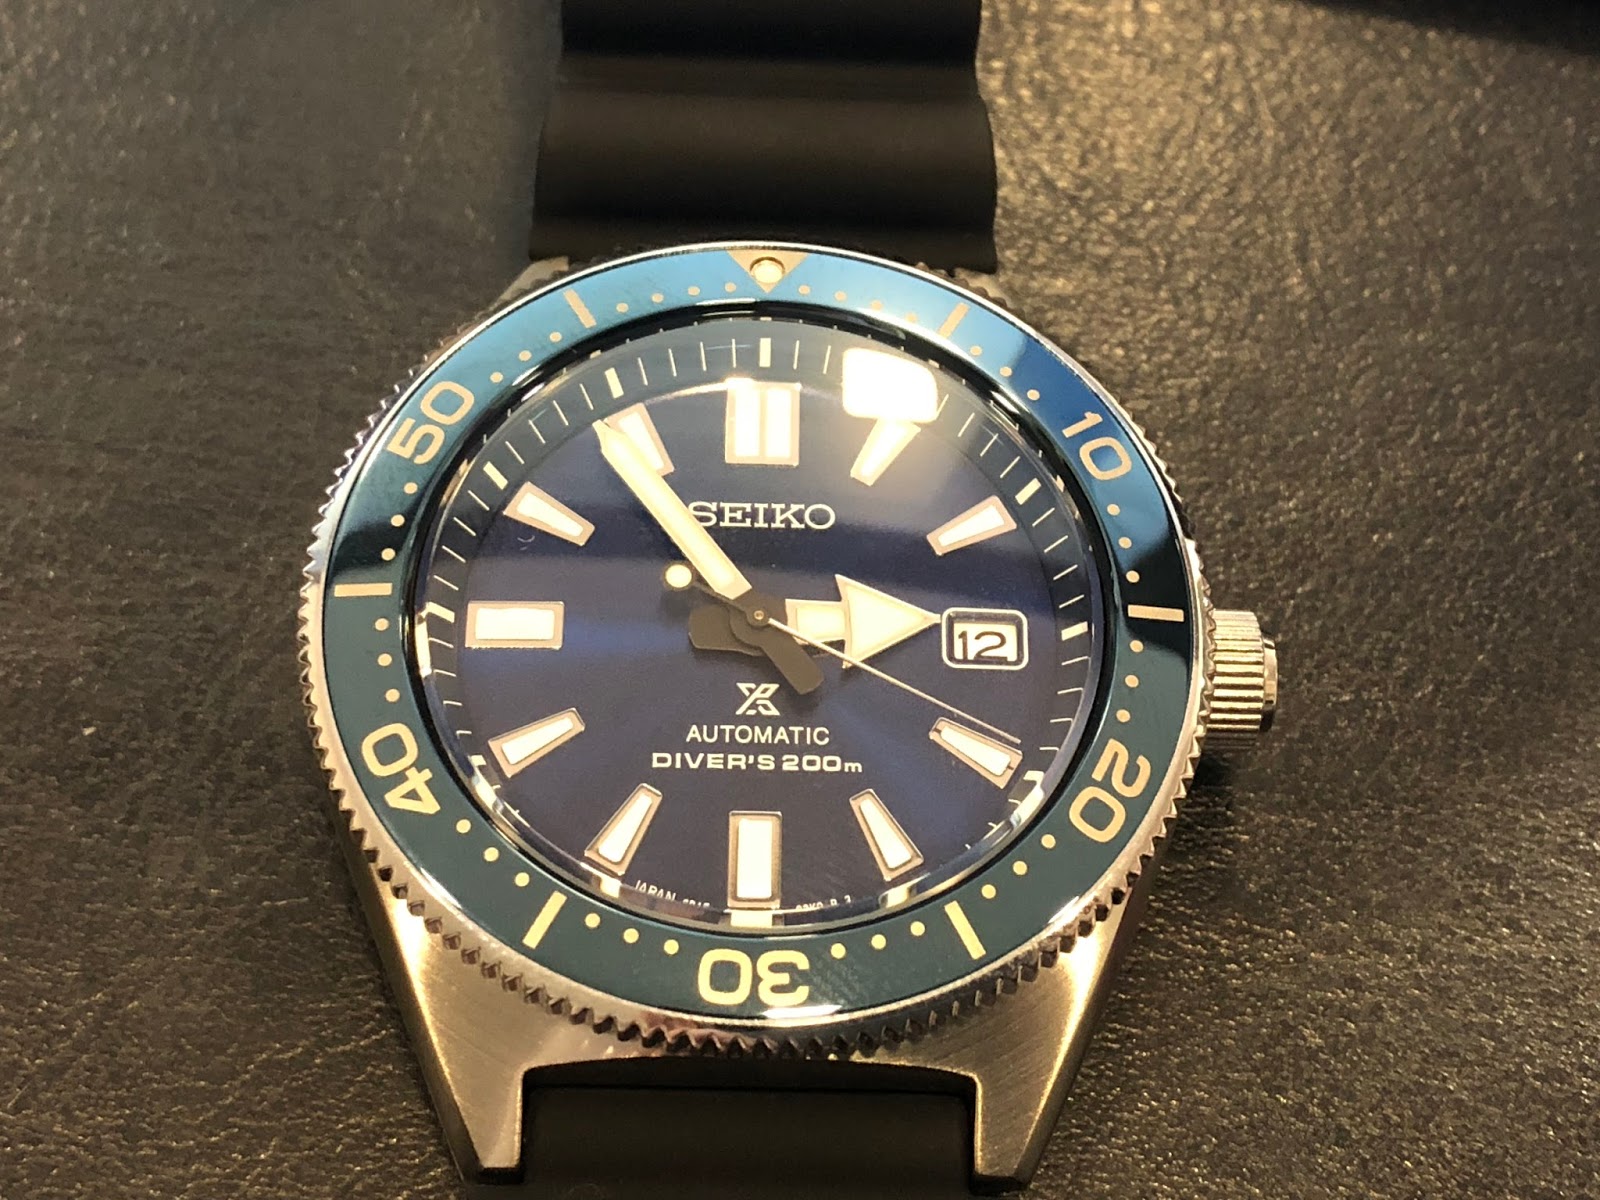 My Eastern Watch Collection: SEIKO Prospex 200M Diver Automatic SBDC053  (SPB053) – A Dress Diving Watch, A Review (plus Video)